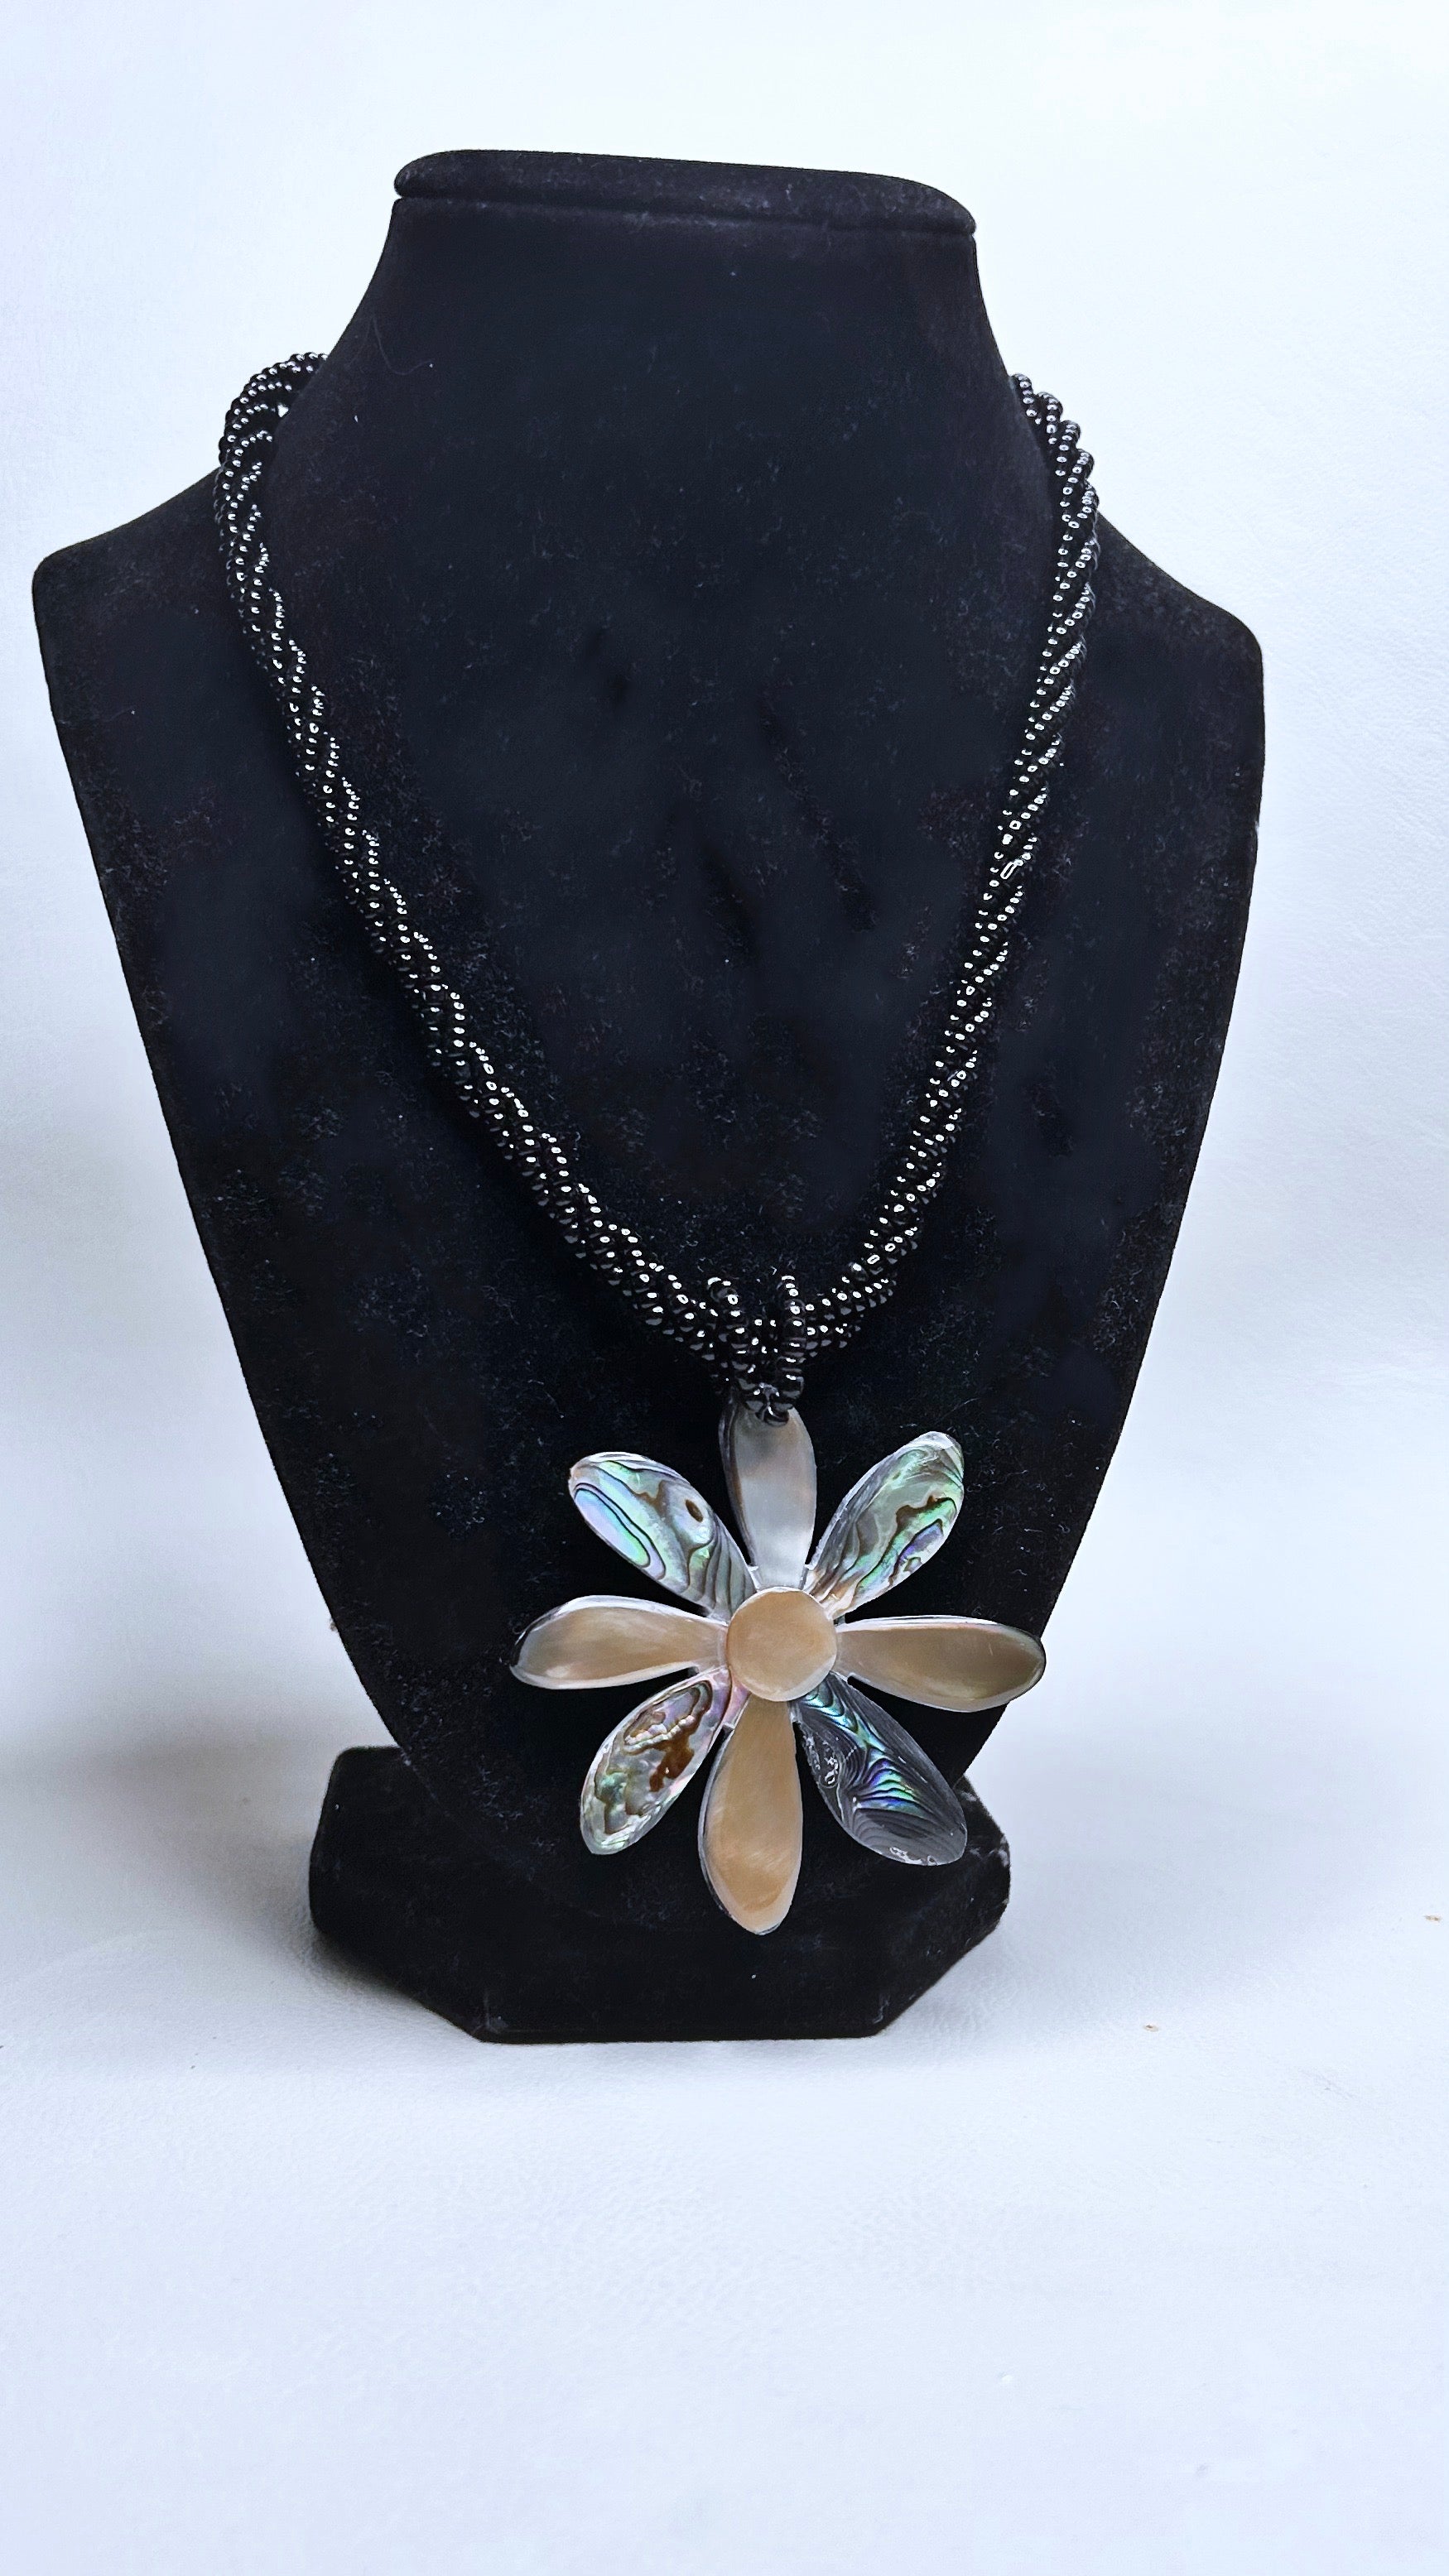 Napua mother of pearl necklace